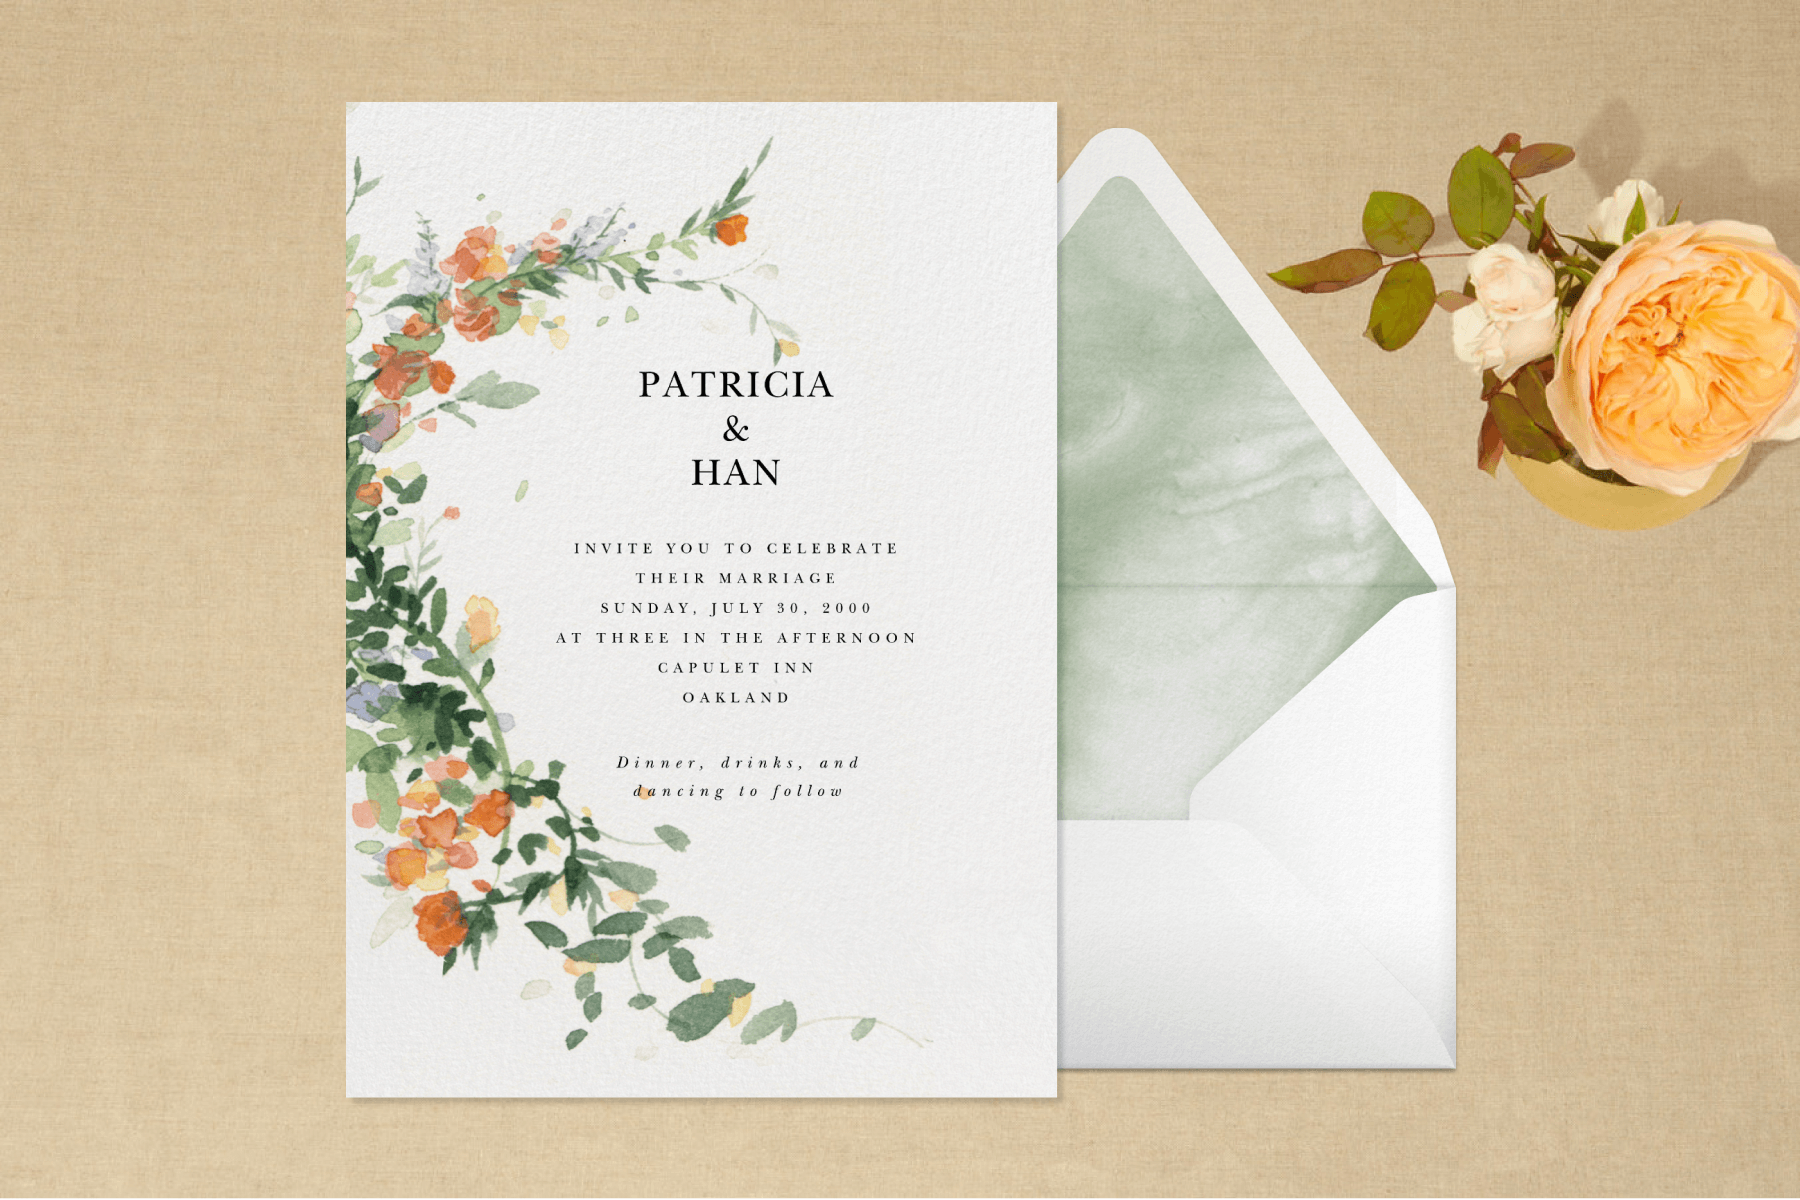 Wedding invitation with watercolor floral illustration featuring orange and yellow flowers.